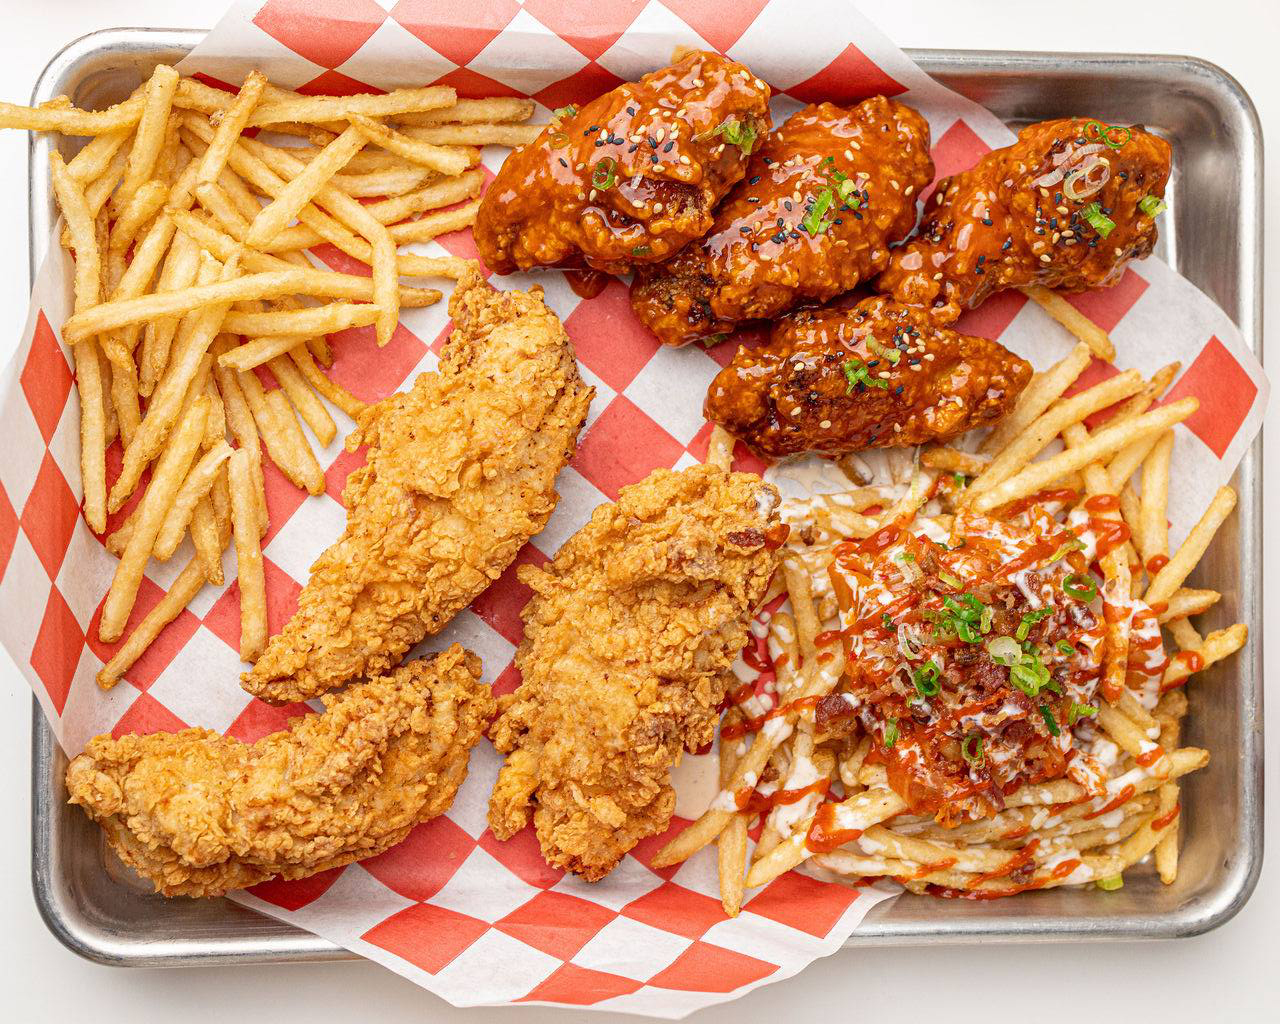 A tray of fried chicken, some dry the other saucy, and fries.